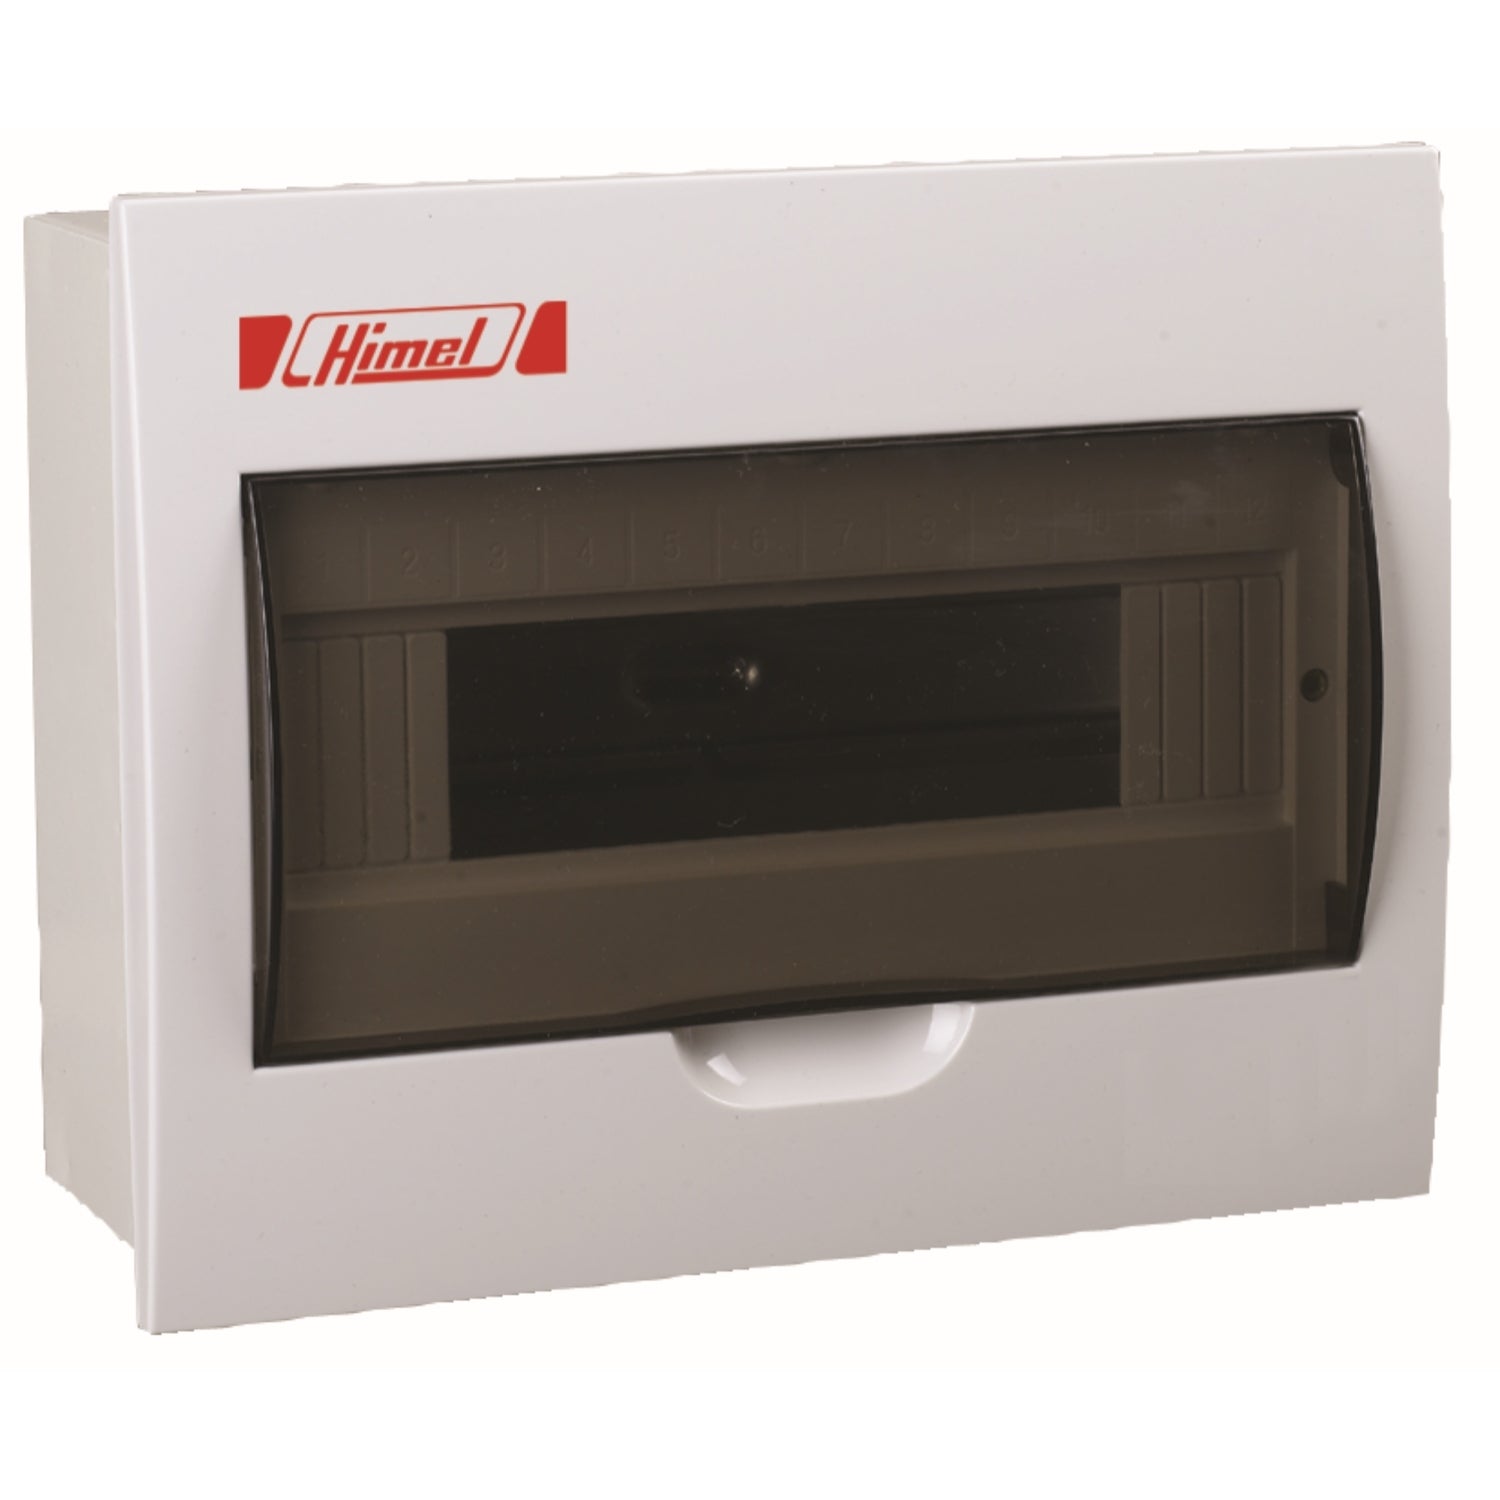 Himel HDPZ50 Metal Box and Plastic Cover Consumer Box Flush Installation Price in Pakistan